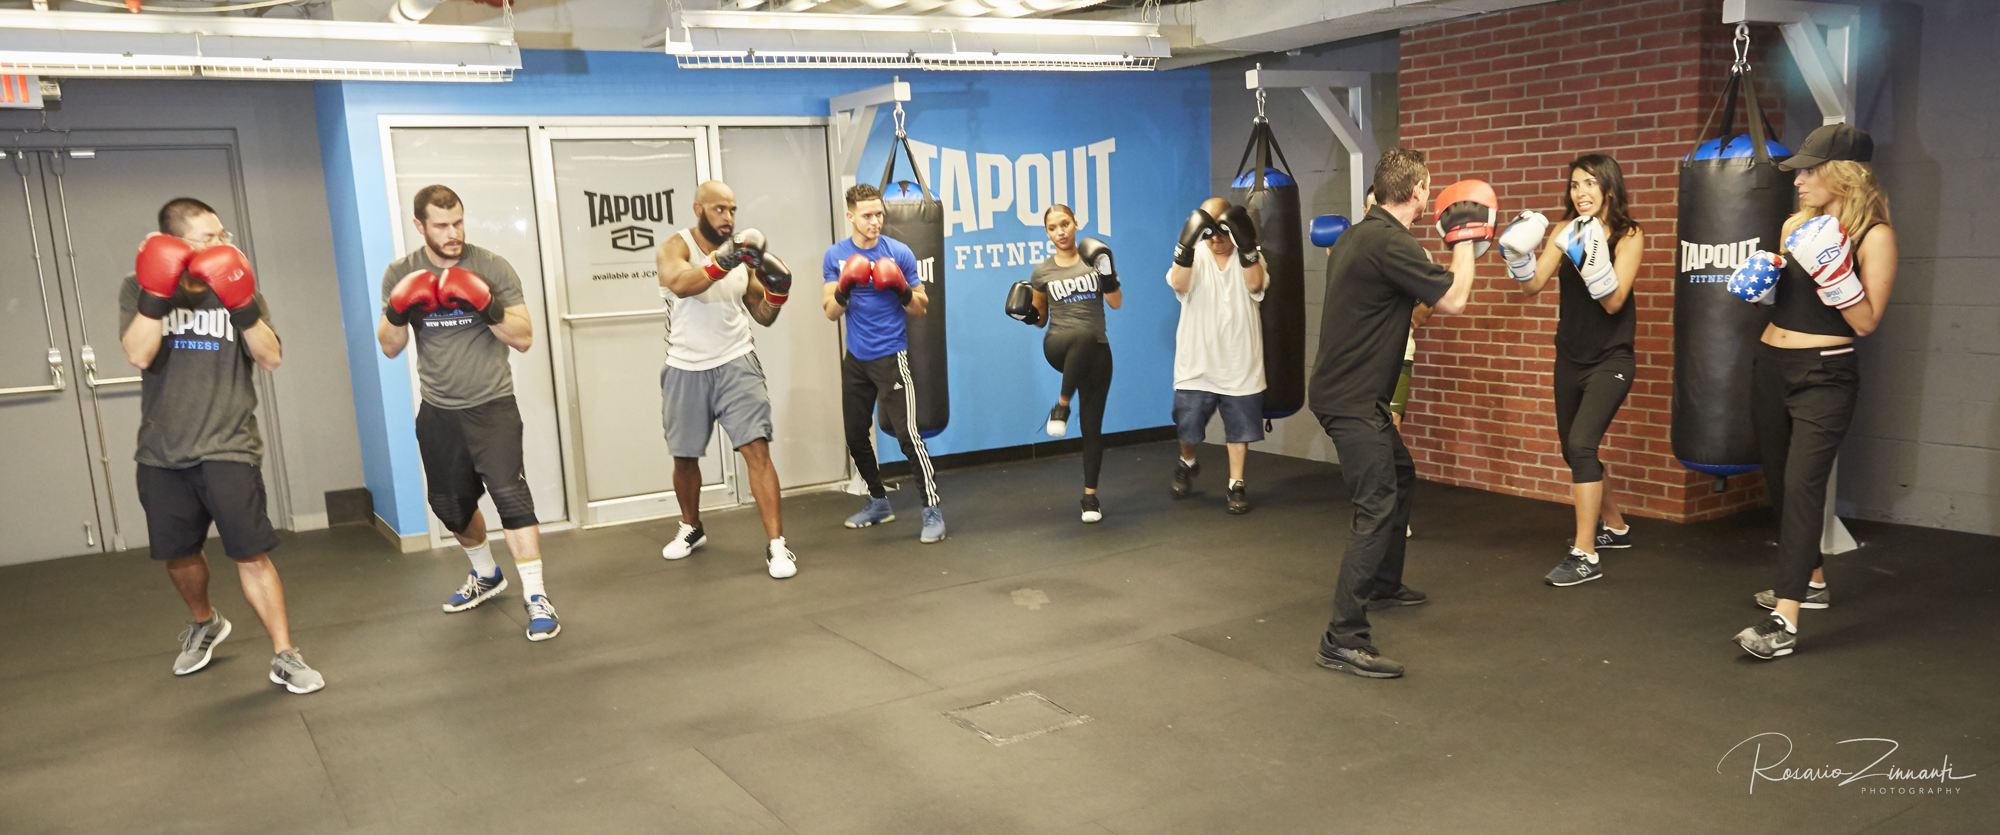 Tapout calls itself “martial-arts infused fitness” with boutique studios.